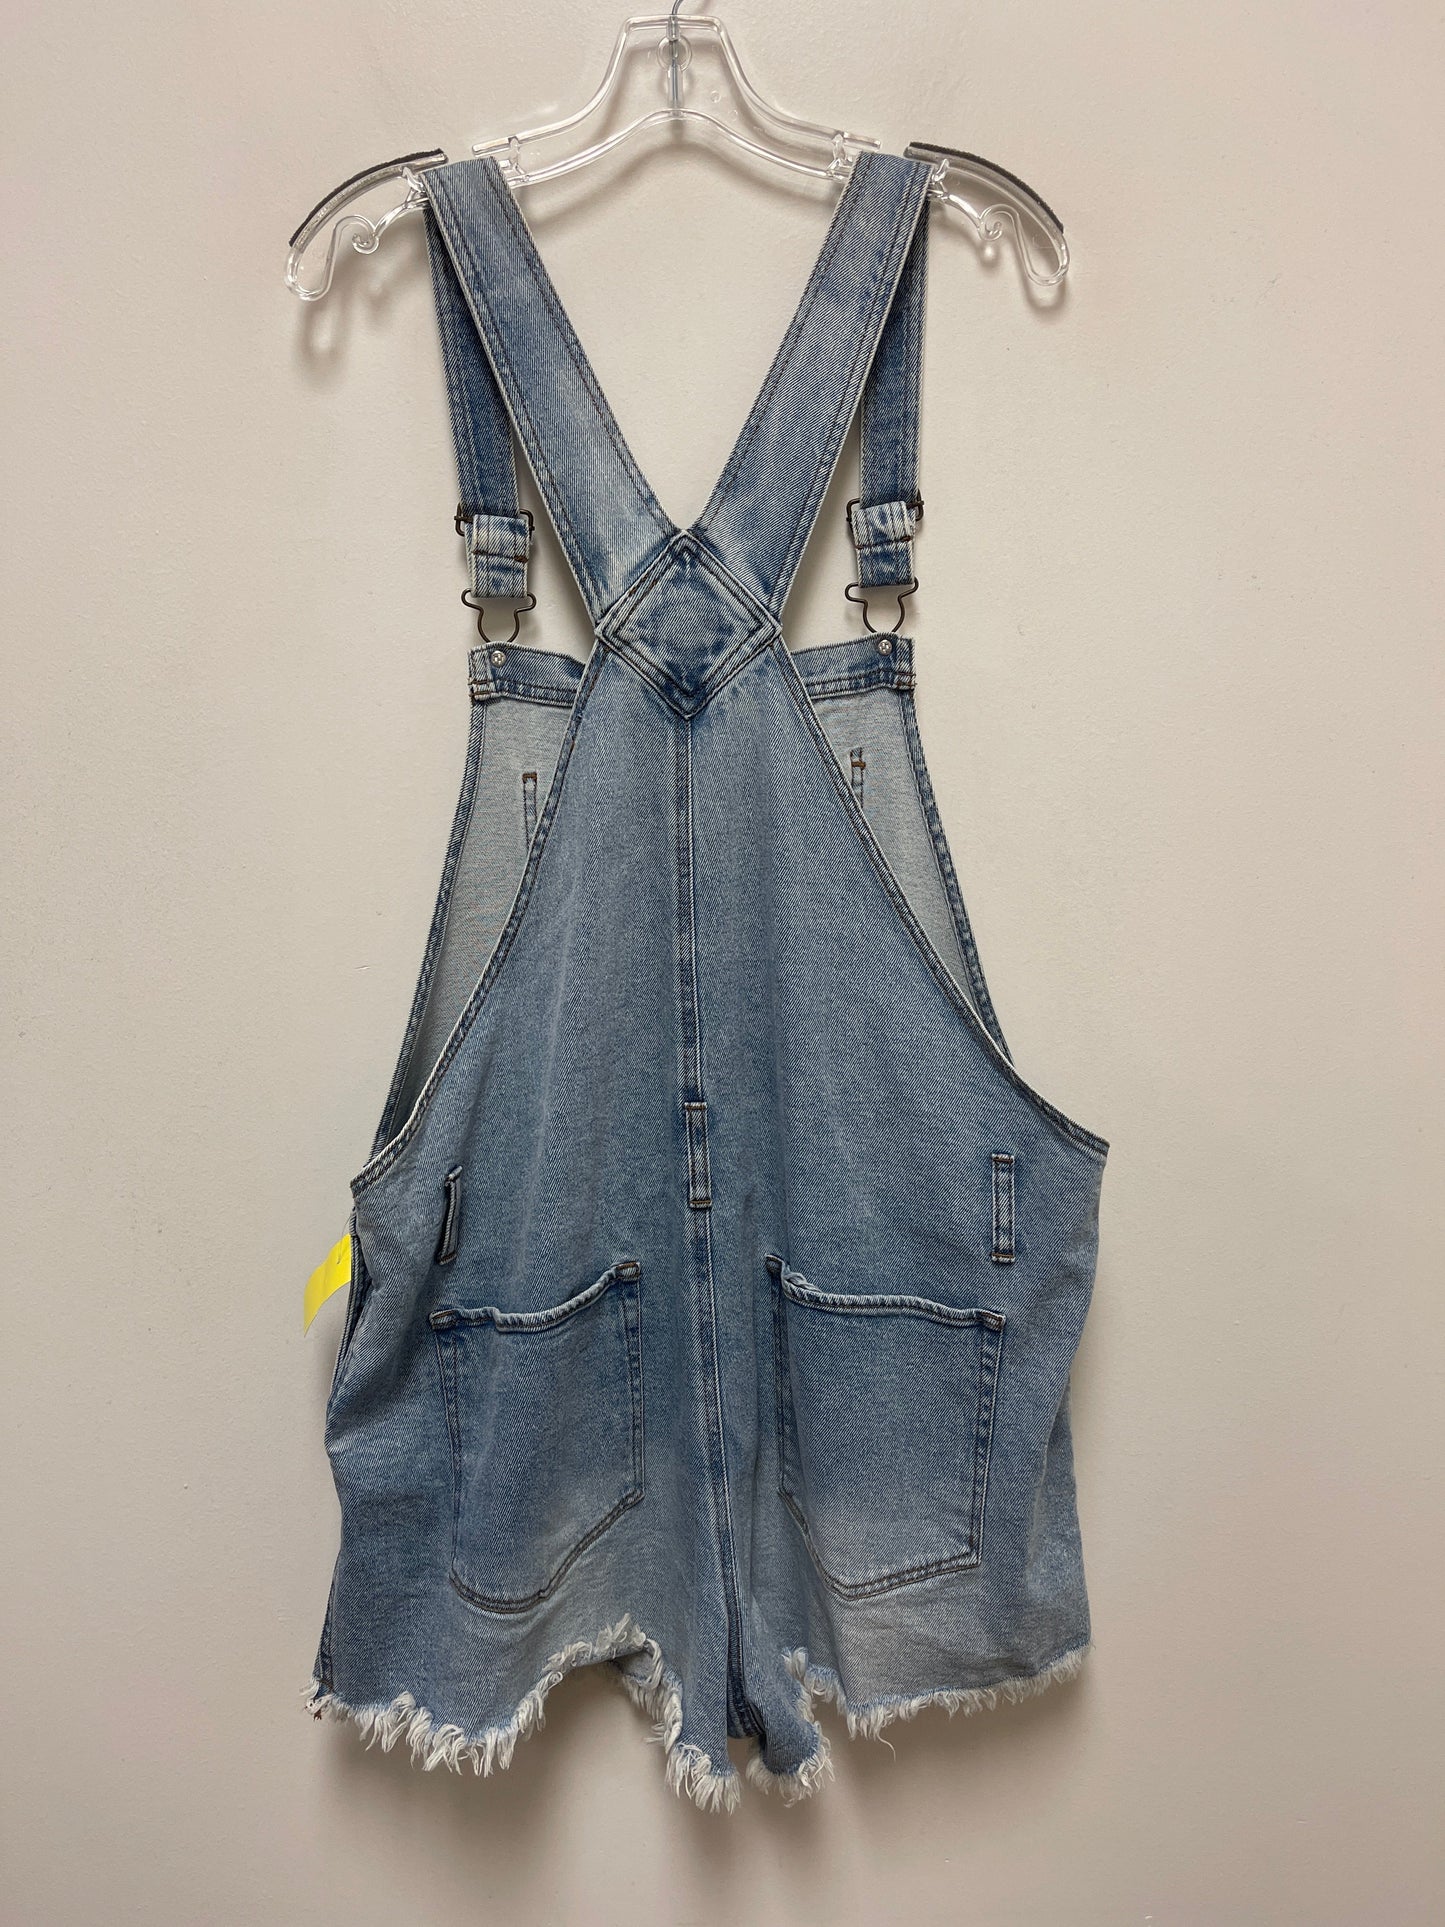 Overalls By Wild Fable  Size: 2x